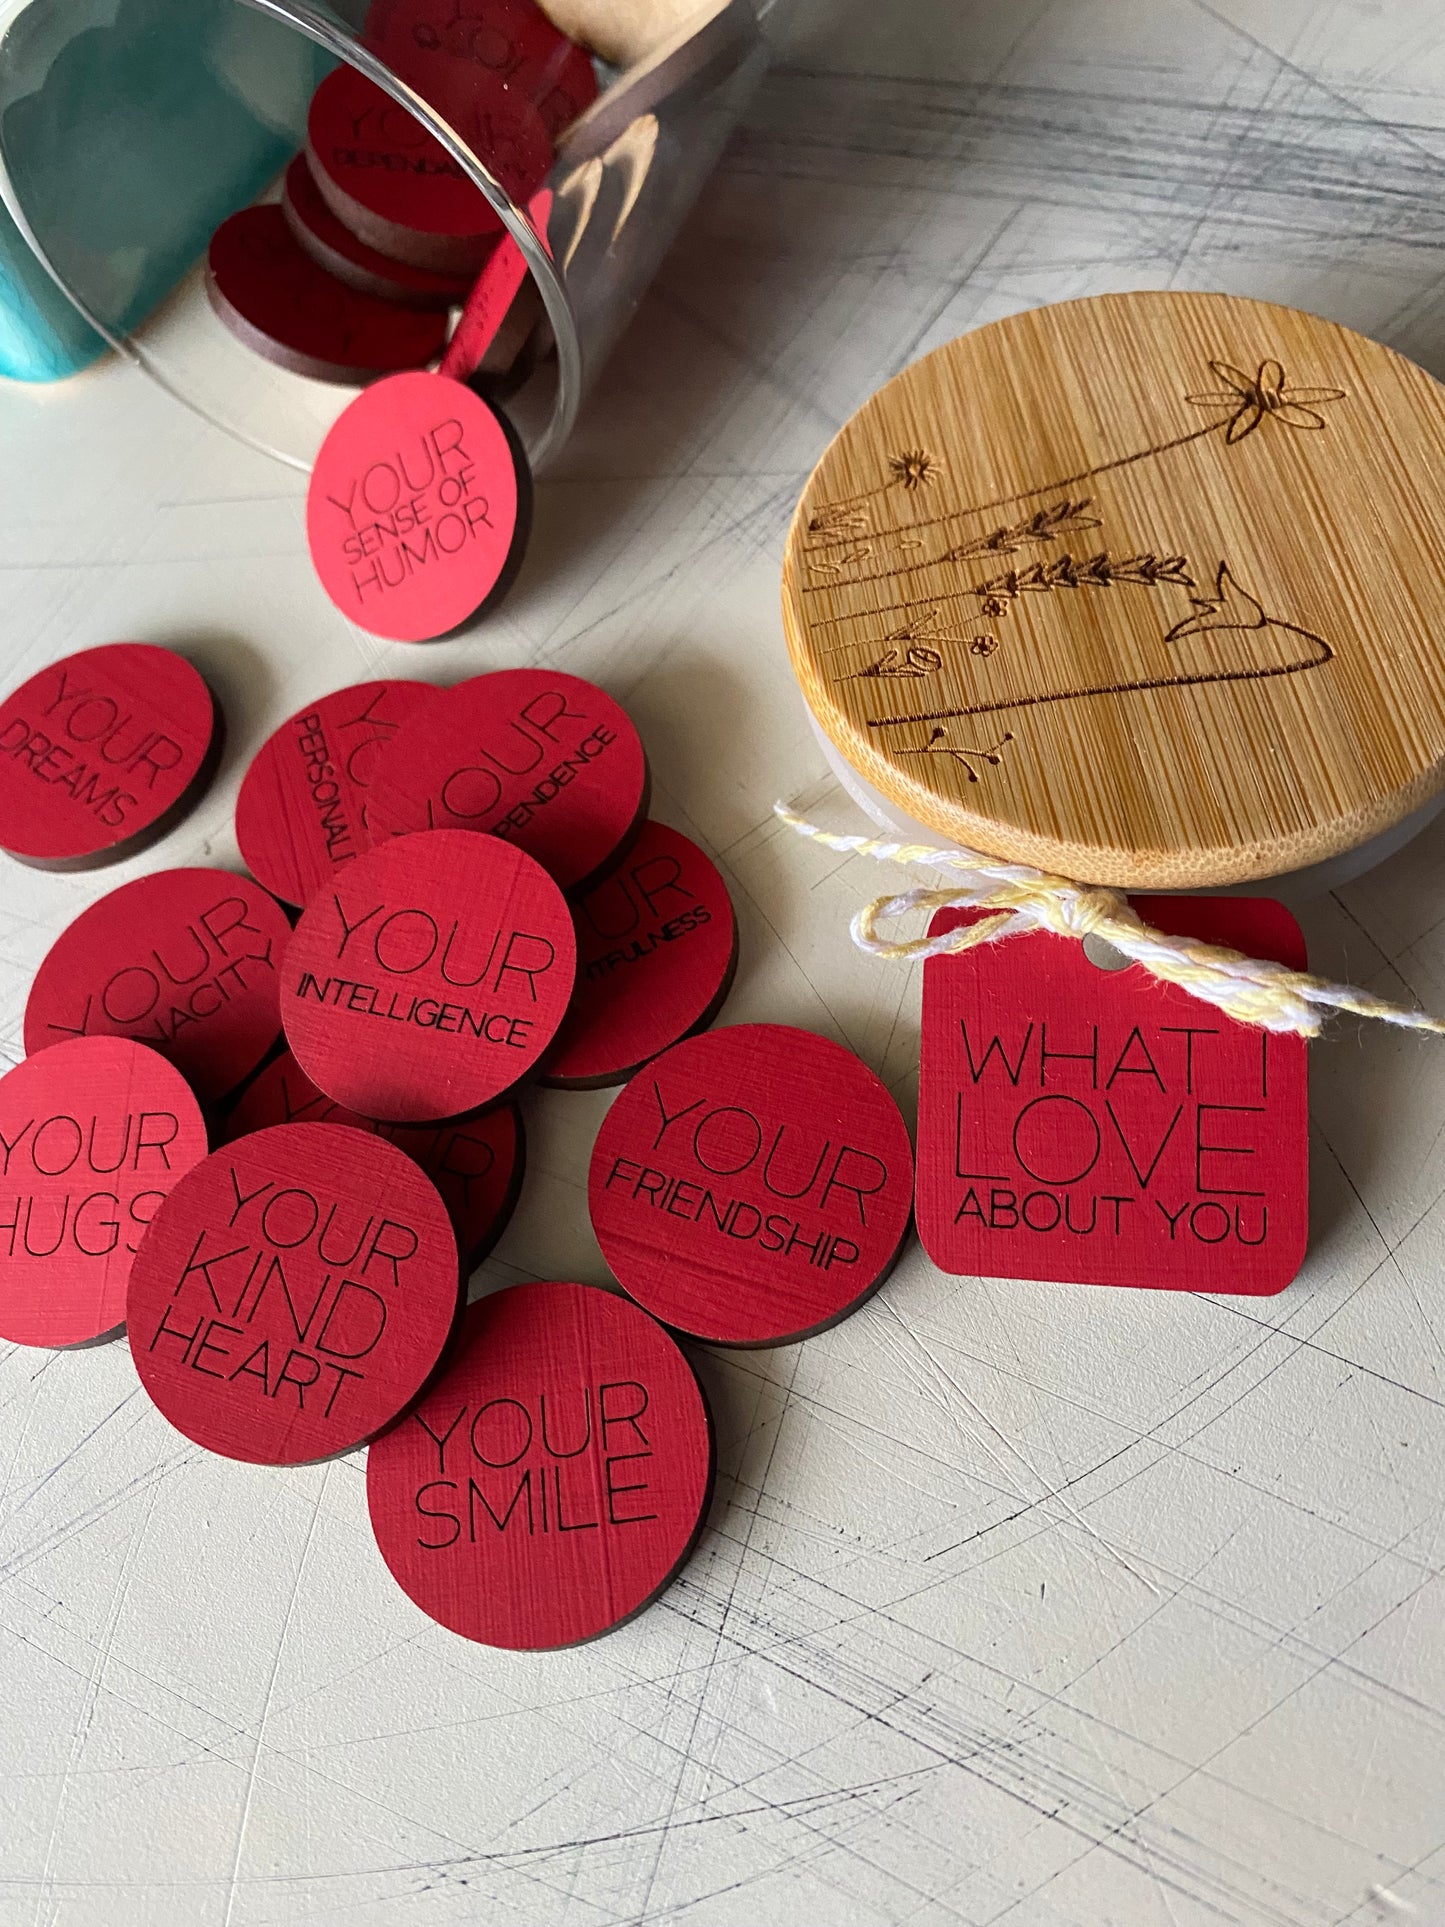 What I Love About You Token Jar - set of 25 engraved wood tokens